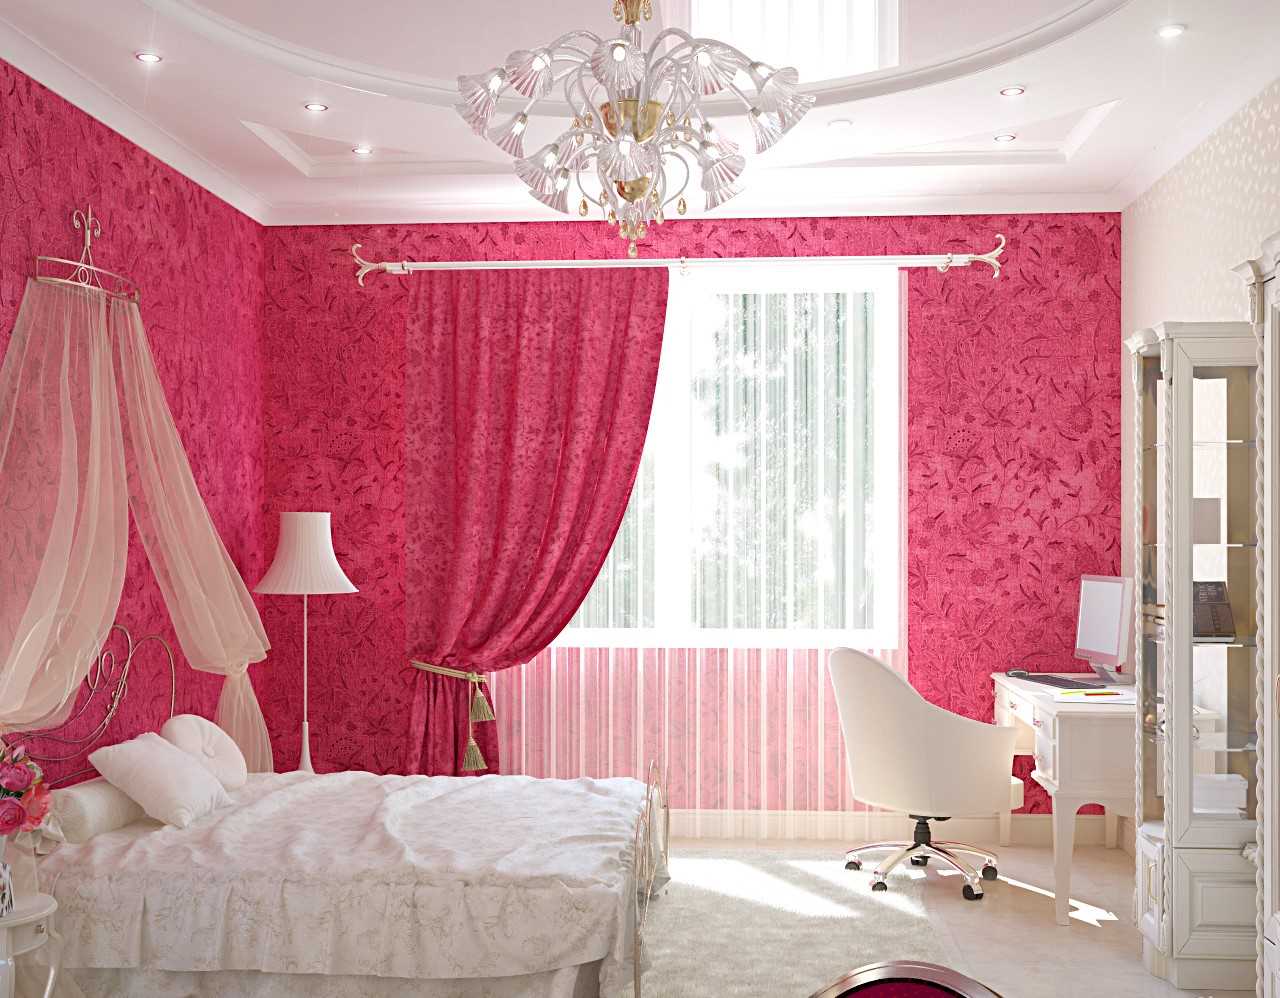 the idea of ​​using pink in an unusual room interior